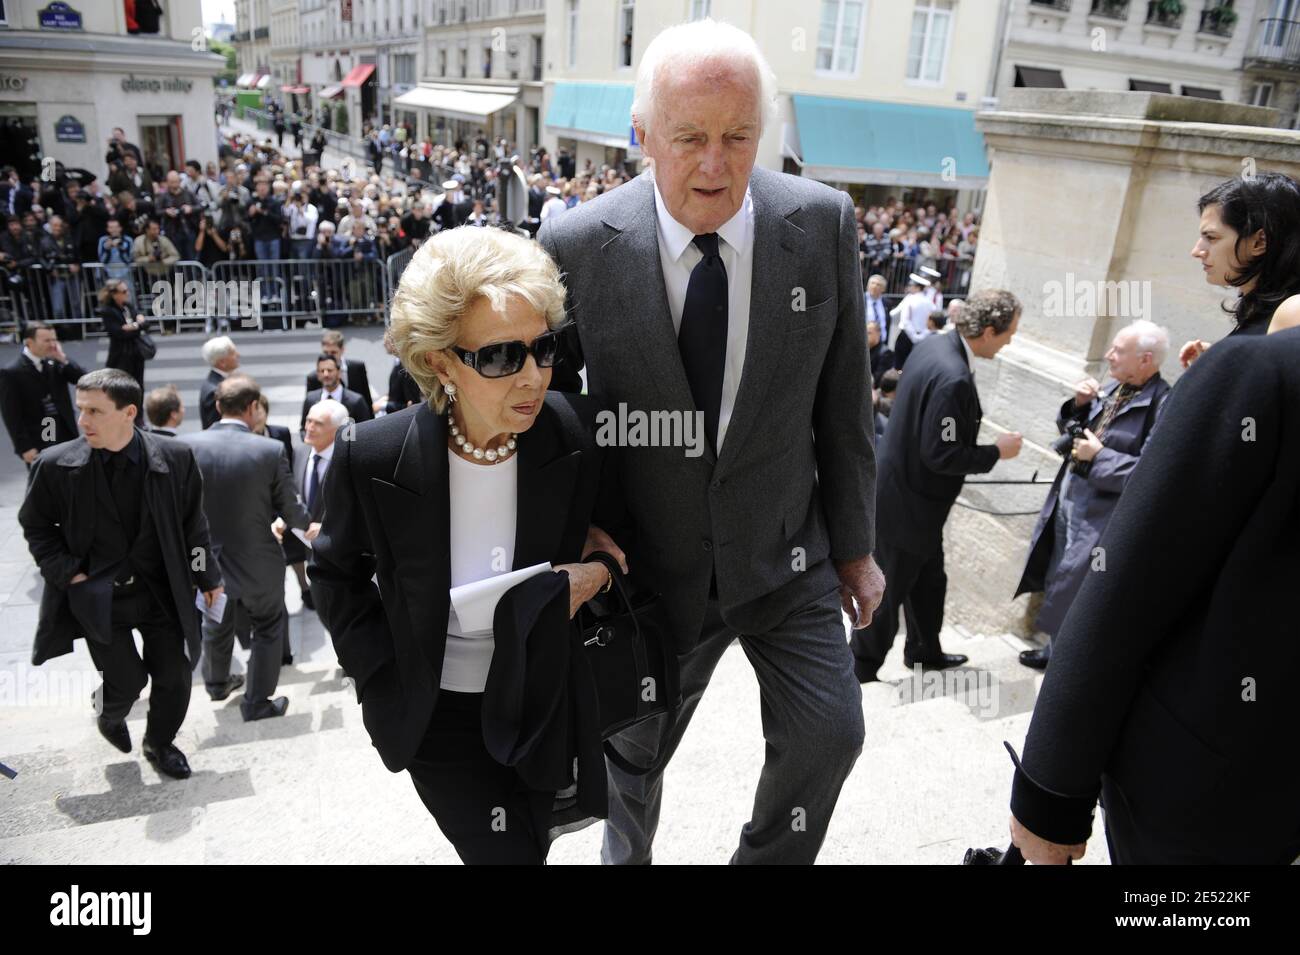 Hubert de Givenchy arriving at the Saint-Roch church in Paris, France,  Thursday, June 5, 2008, for the funeral of French designer Yves Saint  Laurent, who died aged 71, Sunday evening. Photo by